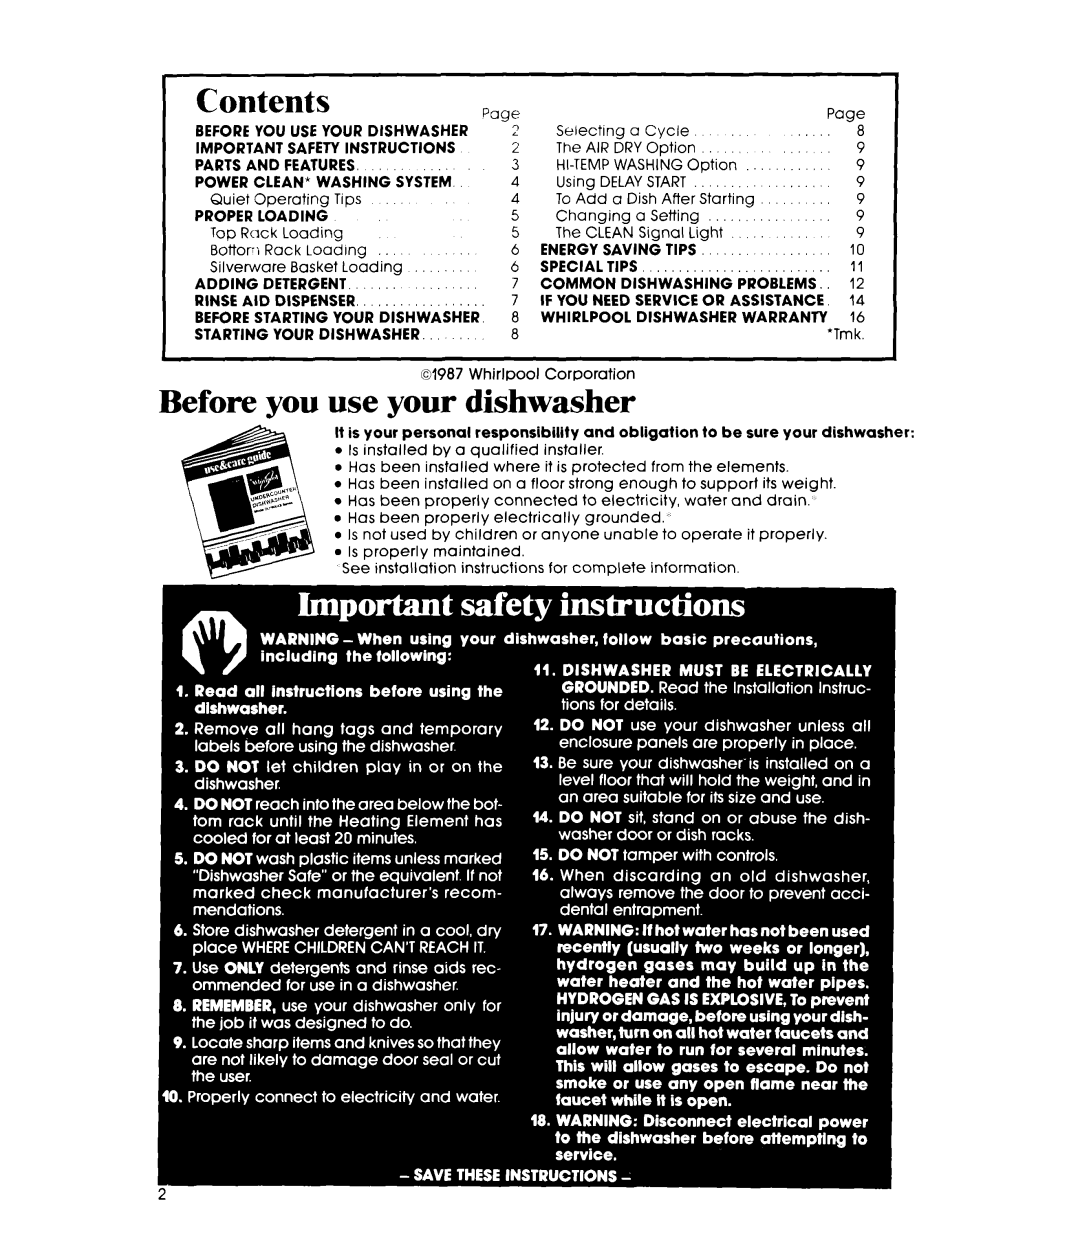 Whirlpool DU7600XS manual Contents, Before you use your dishwasher 